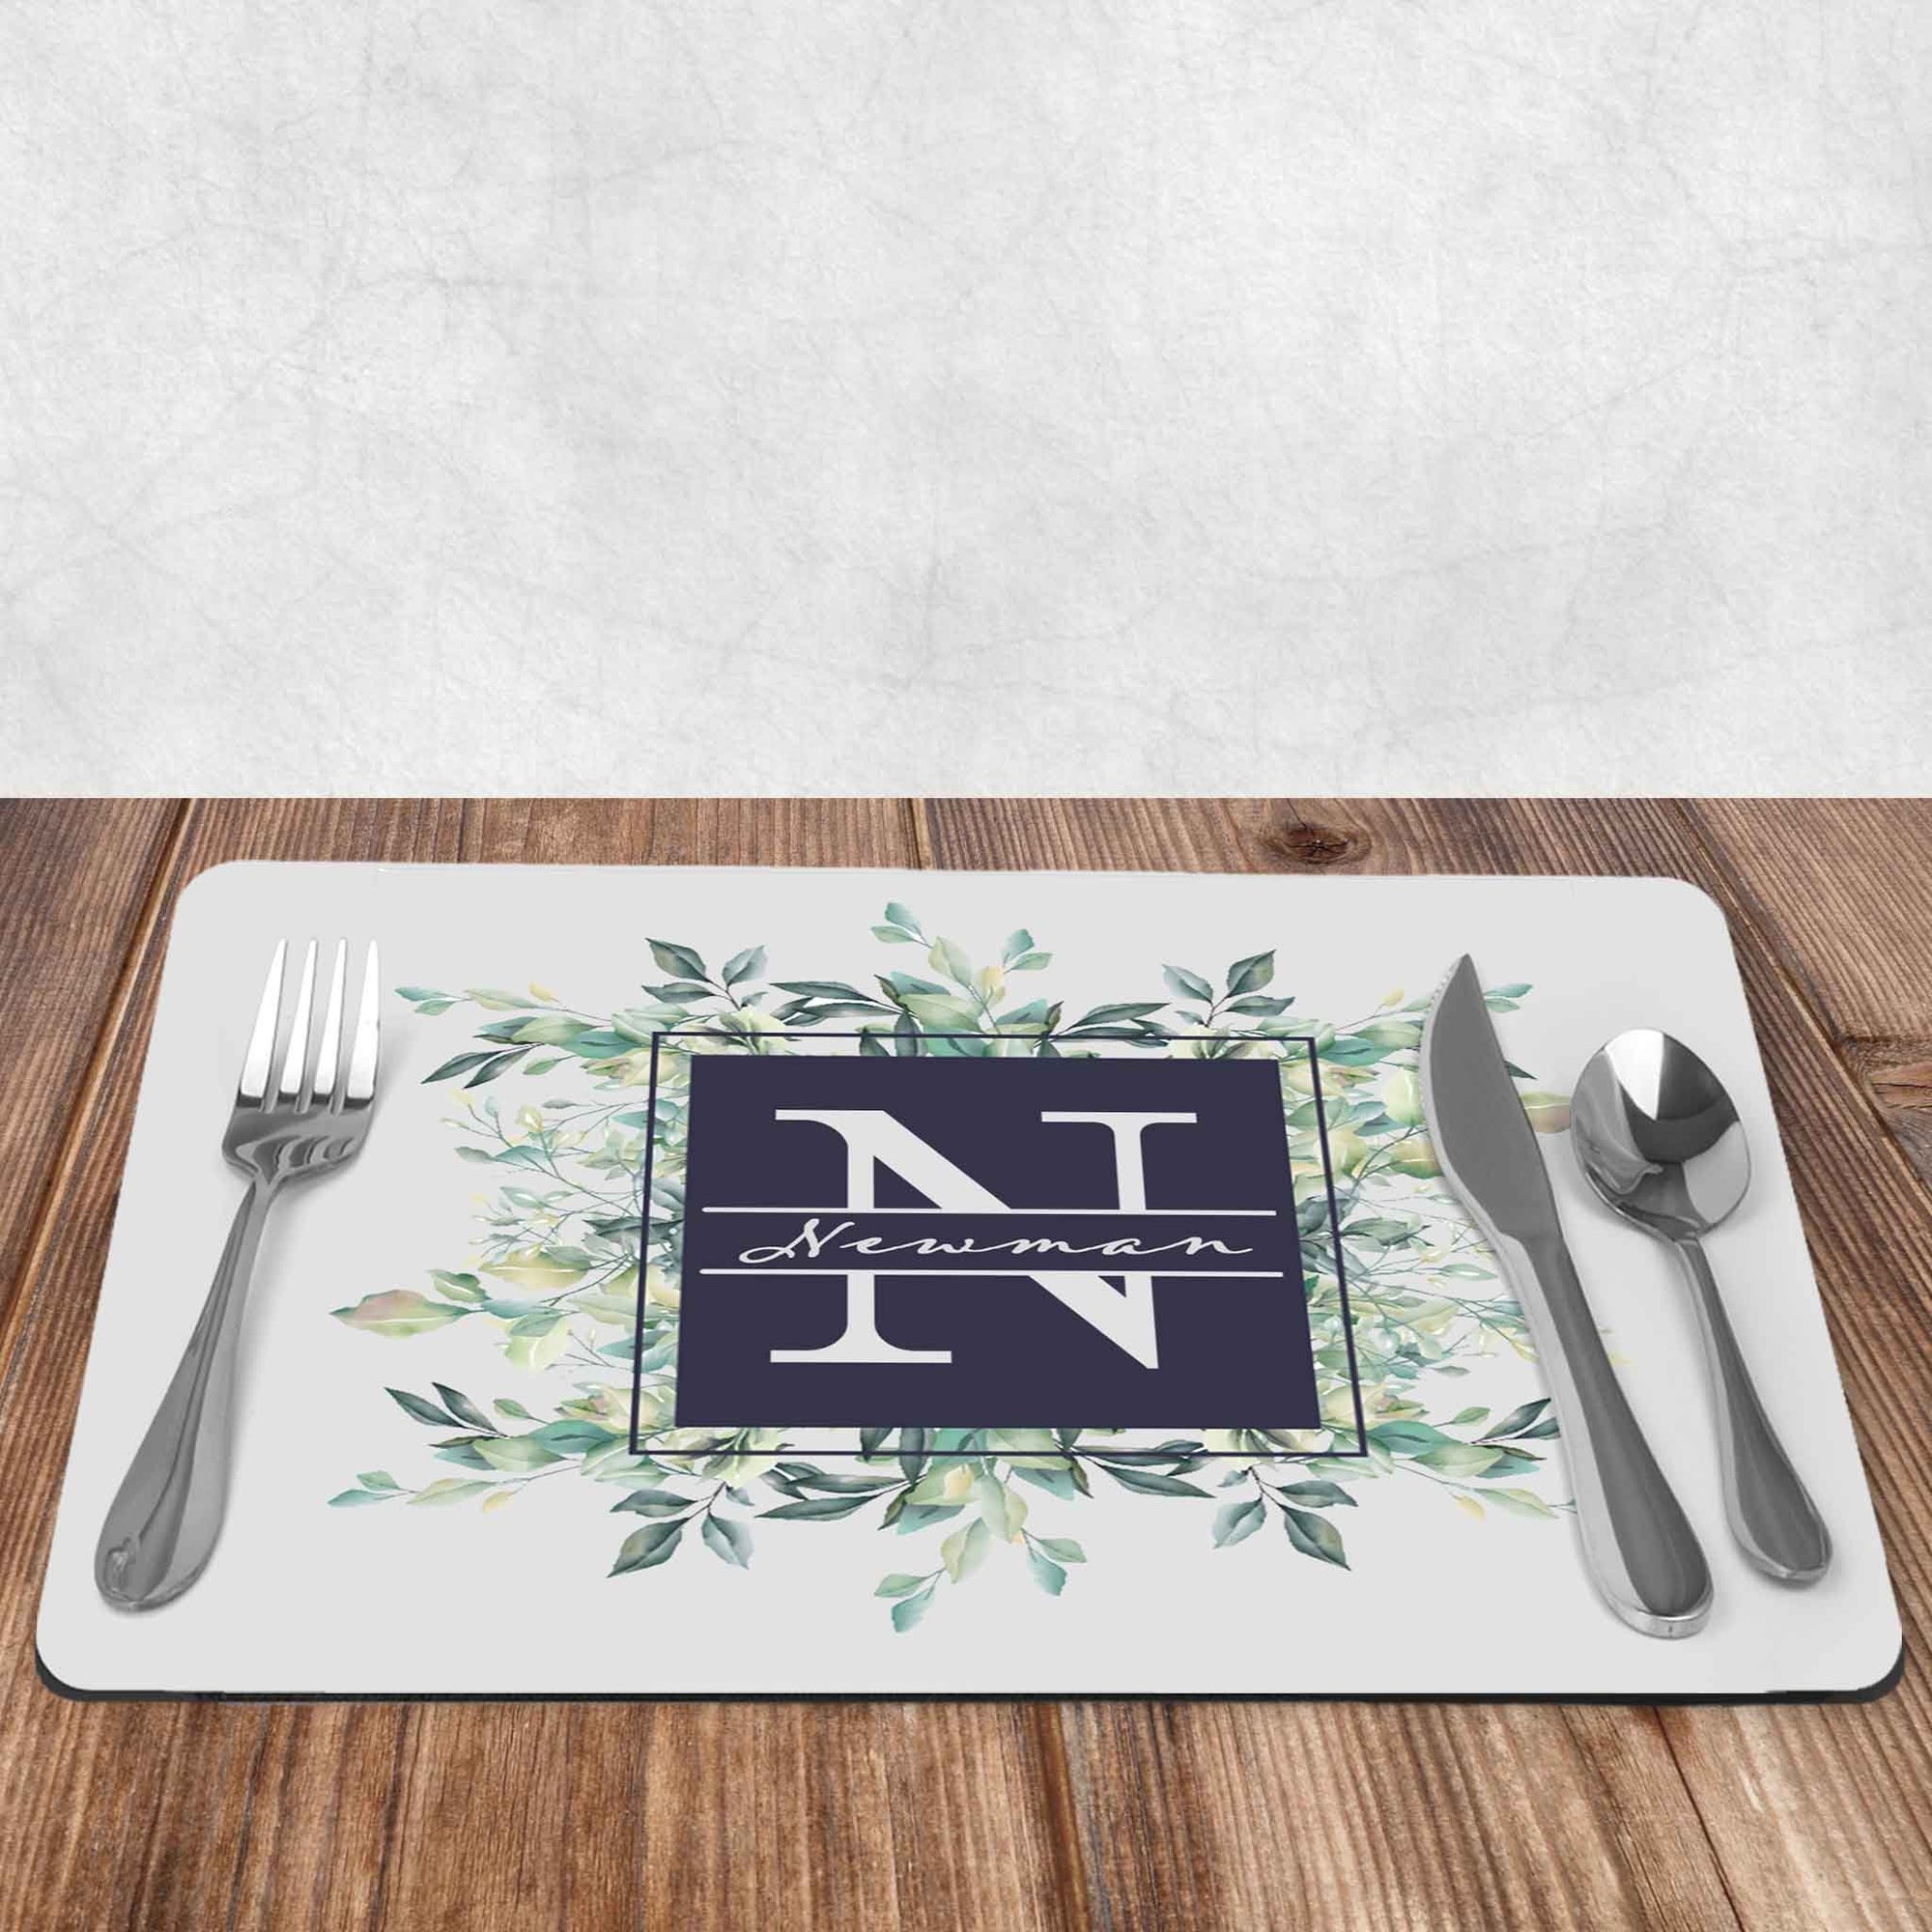 Custom Placemats | Personalized Dining and Serving | Succulent Bouquet